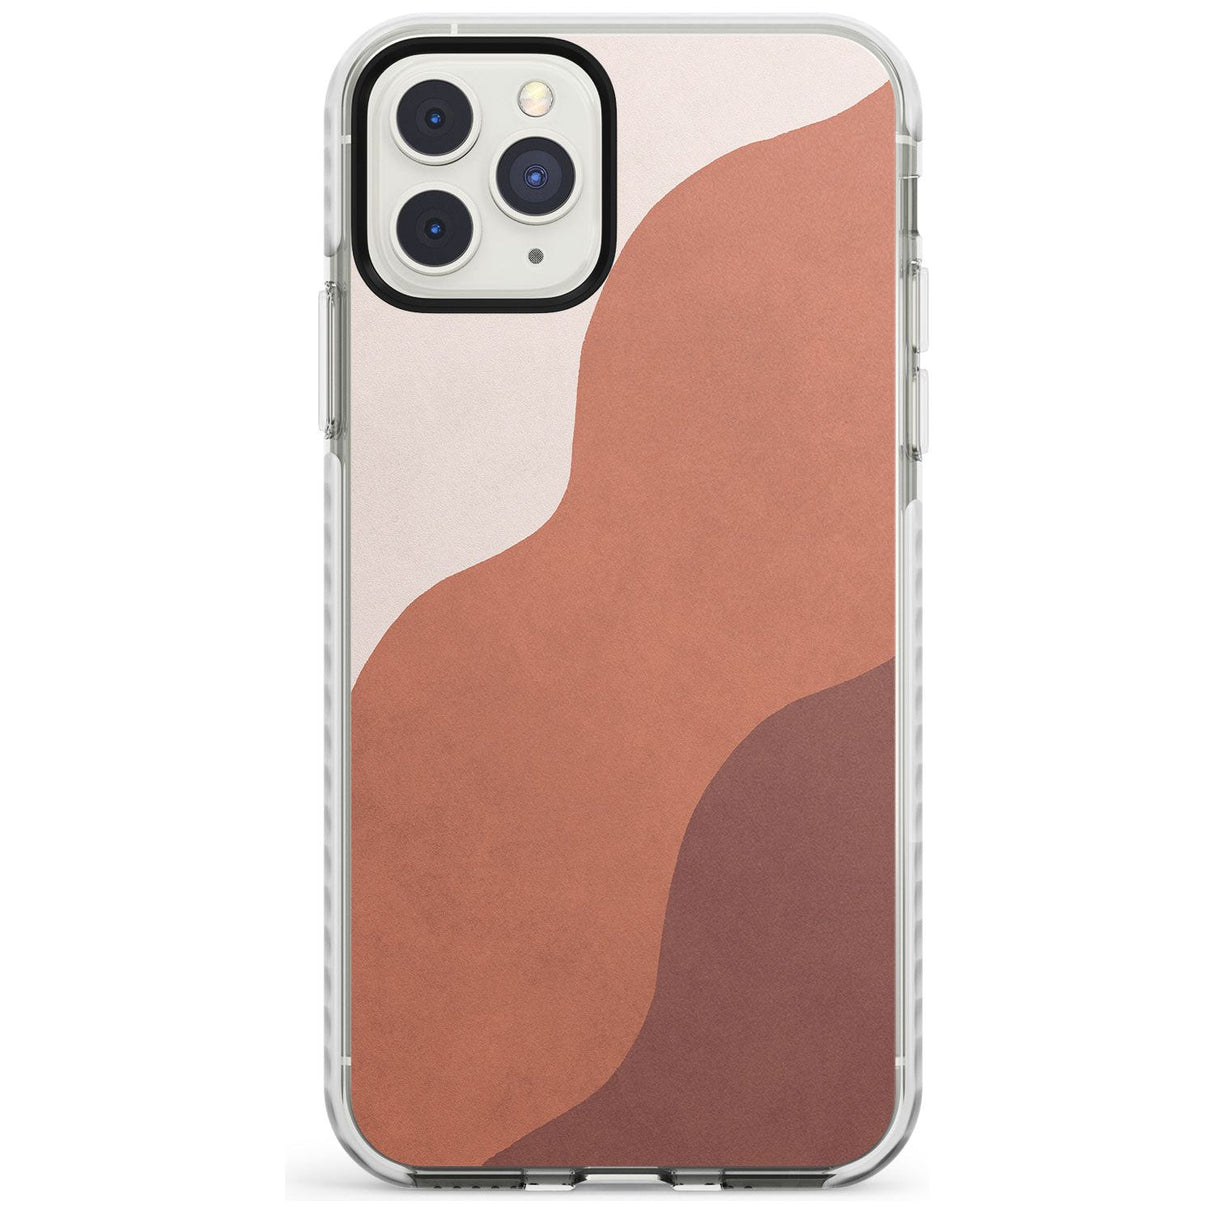 Lush Abstract Watercolour Design #3 Phone Case iPhone 11 Pro Max / Impact Case,iPhone 11 Pro / Impact Case,iPhone 12 Pro / Impact Case,iPhone 12 Pro Max / Impact Case Blanc Space